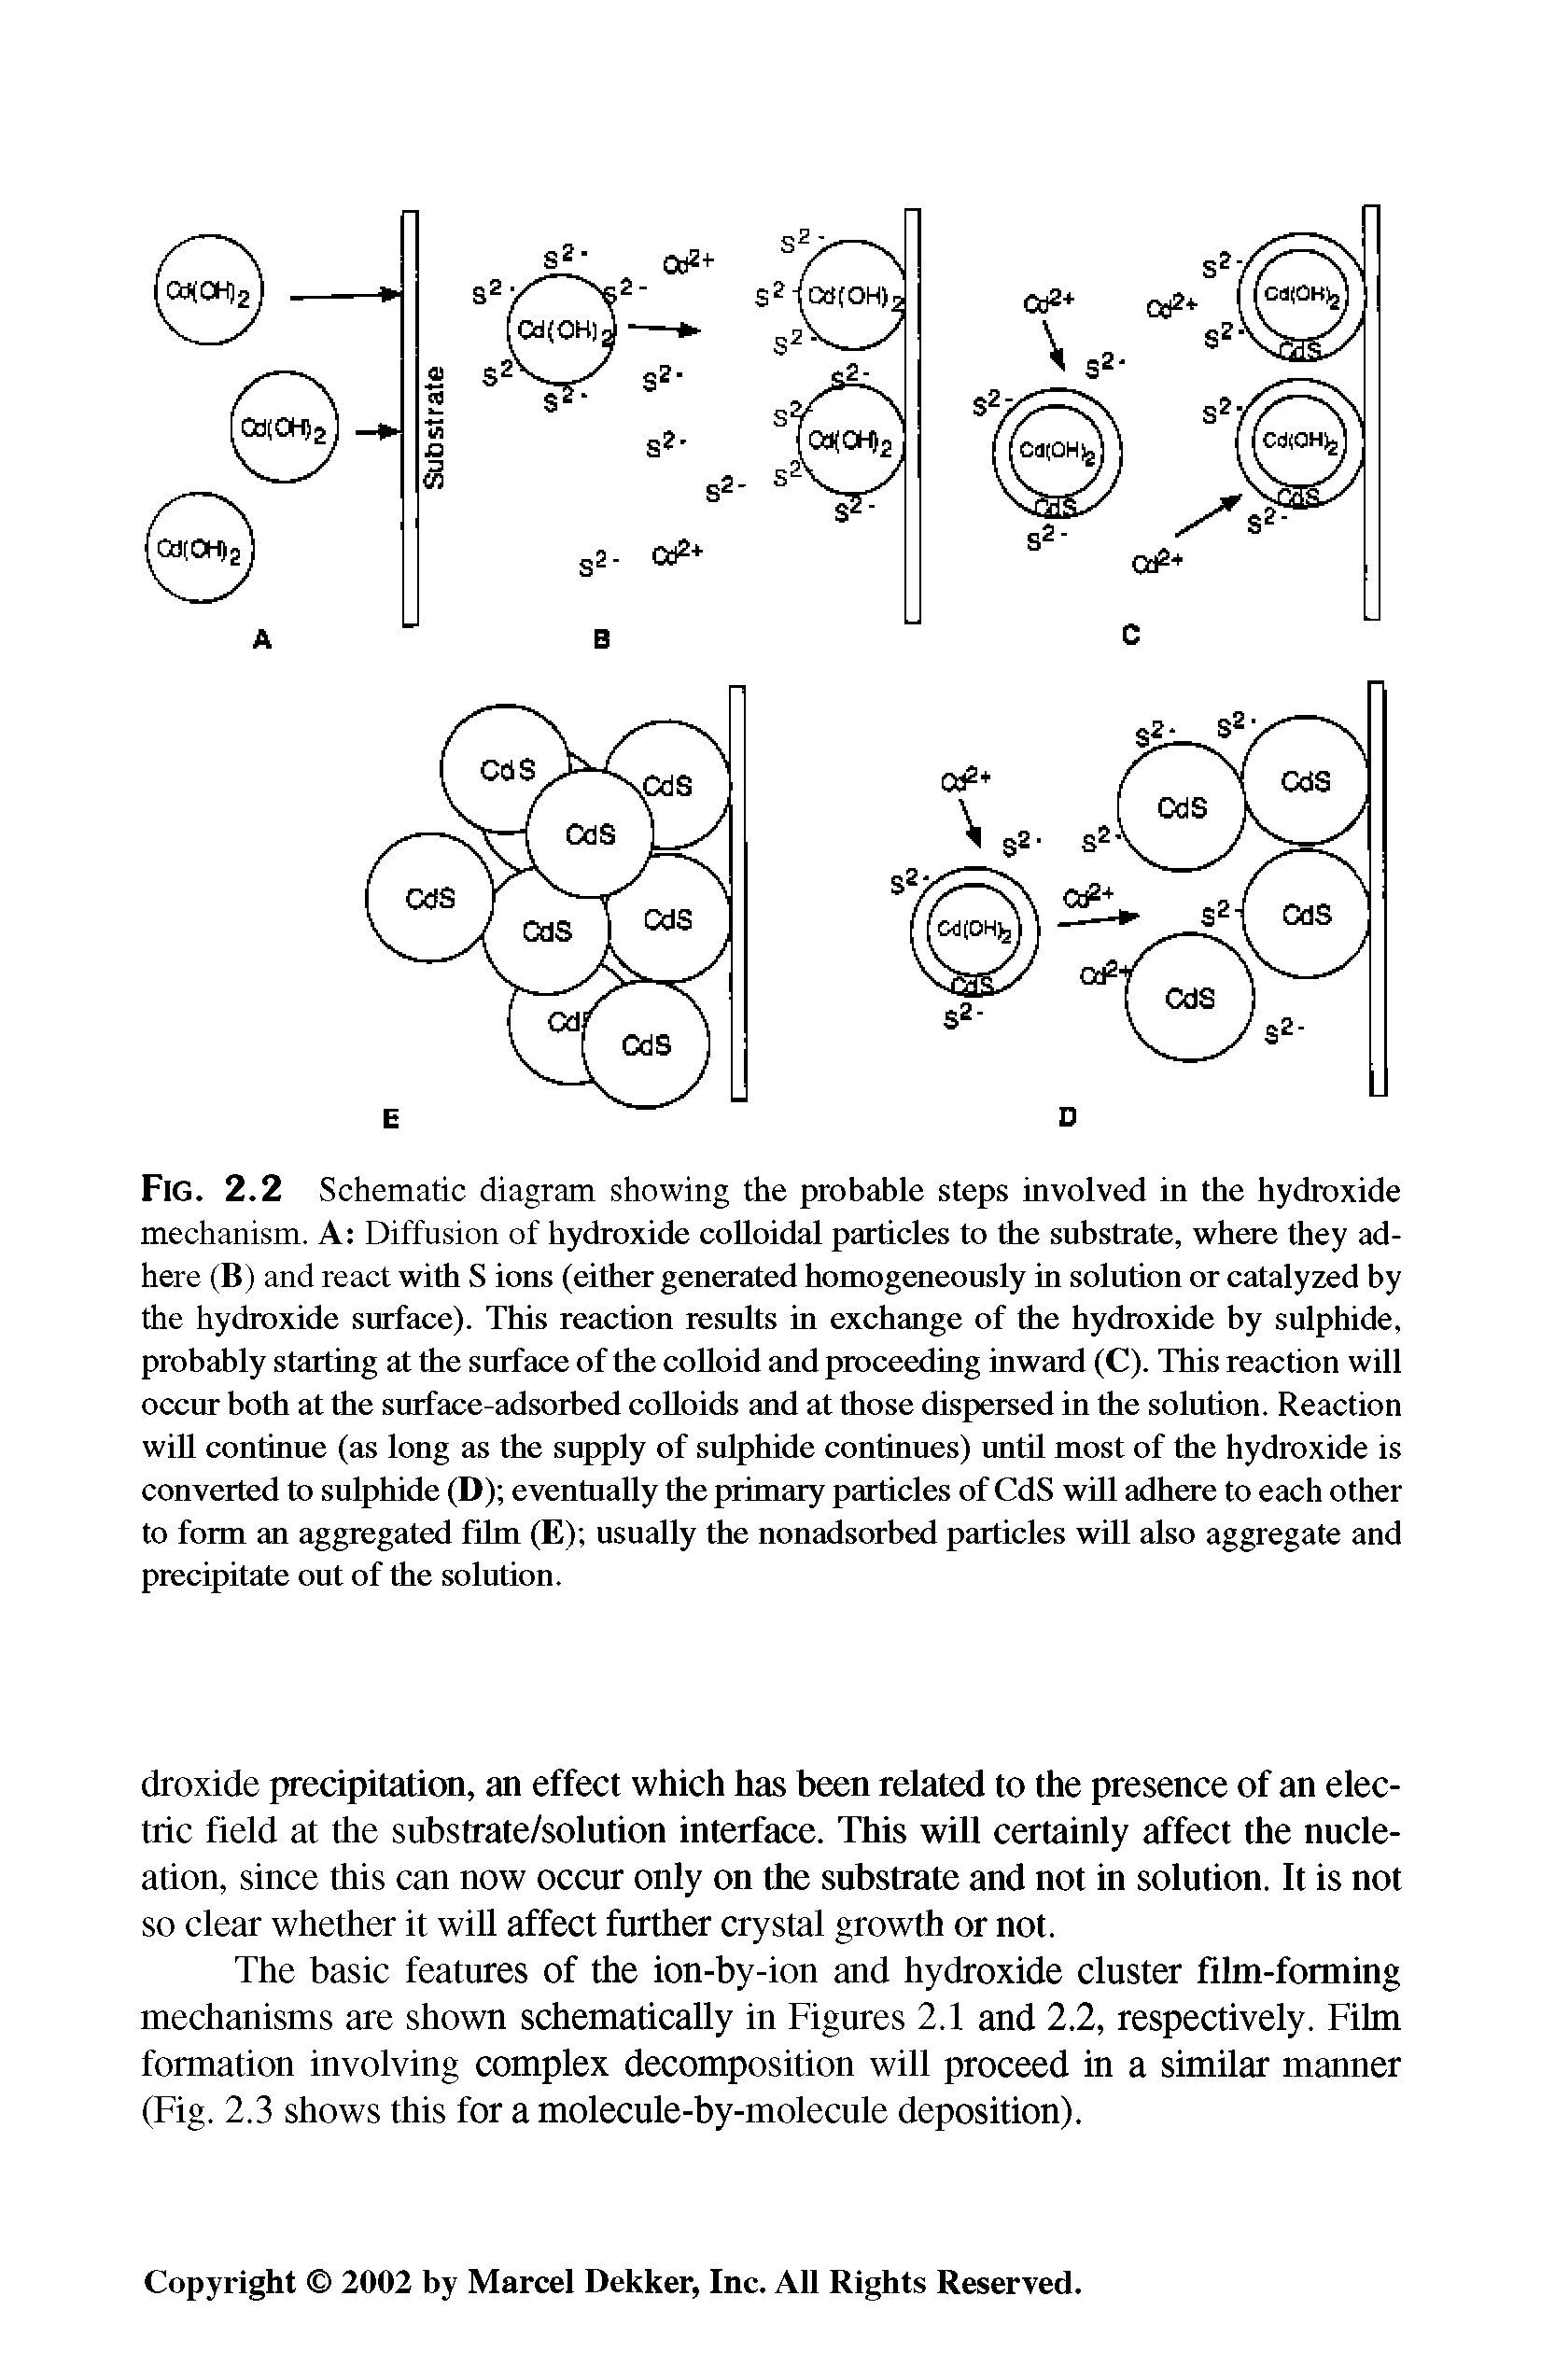 Fig. 2.2 Schematic diagram showing the probable steps involved in the hydroxide mechanism. A Diffusion of hydroxide colloidal particles to the substrate, where they adhere (B) and react with S ions (either generated homogeneously in solution or catalyzed by the hydroxide surface). This reaction results in exchange of the hydroxide by sulphide, probably starting at the surface of the colloid and proceeding inward (C). This reaction will occur both at the surface-adsorbed colloids and at those dispersed in the solution. Reaction will continue (as long as the supply of sulphide continues) until most of the hydroxide is converted to sulphide (D) eventually the primary particles of CdS will adhere to each other to form an aggregated film (E) usually the nonadsorbed particles will also aggregate and precipitate out of the solution.